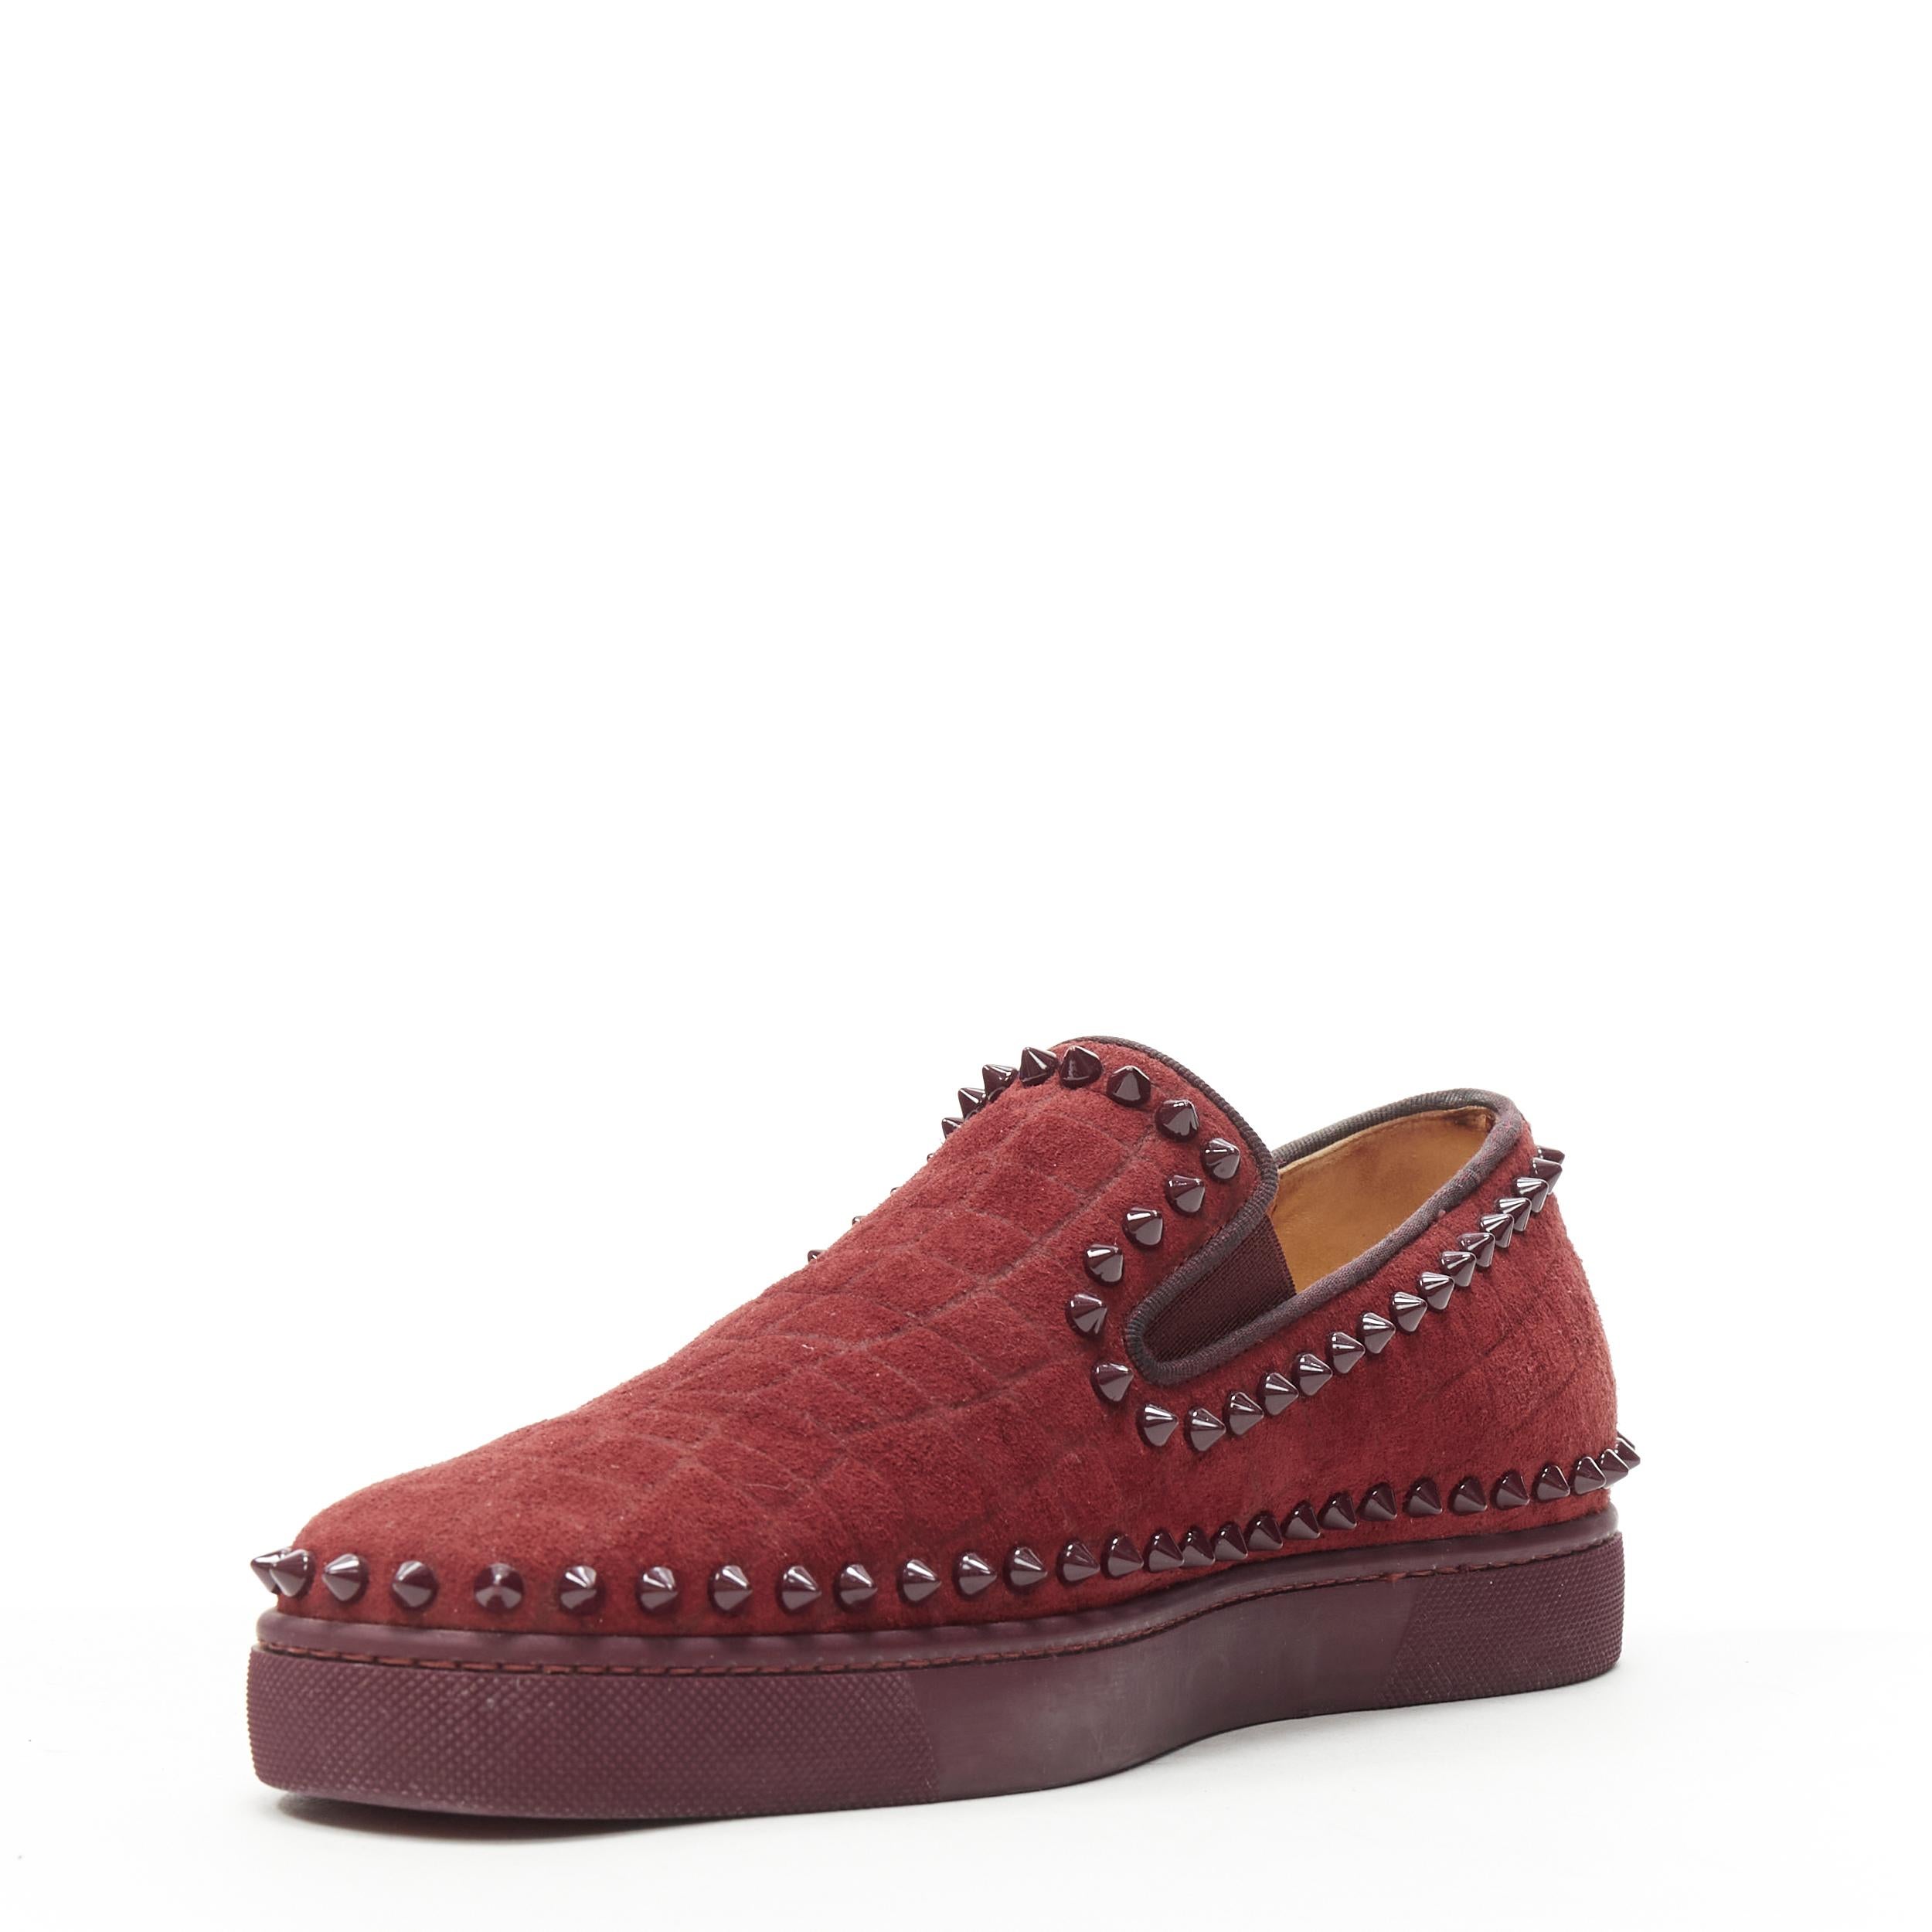 CHRISTIAN LOUBOUTIN Pik Boat burgundy croc suede spike stud low top sneaker EU41 In Excellent Condition For Sale In Hong Kong, NT